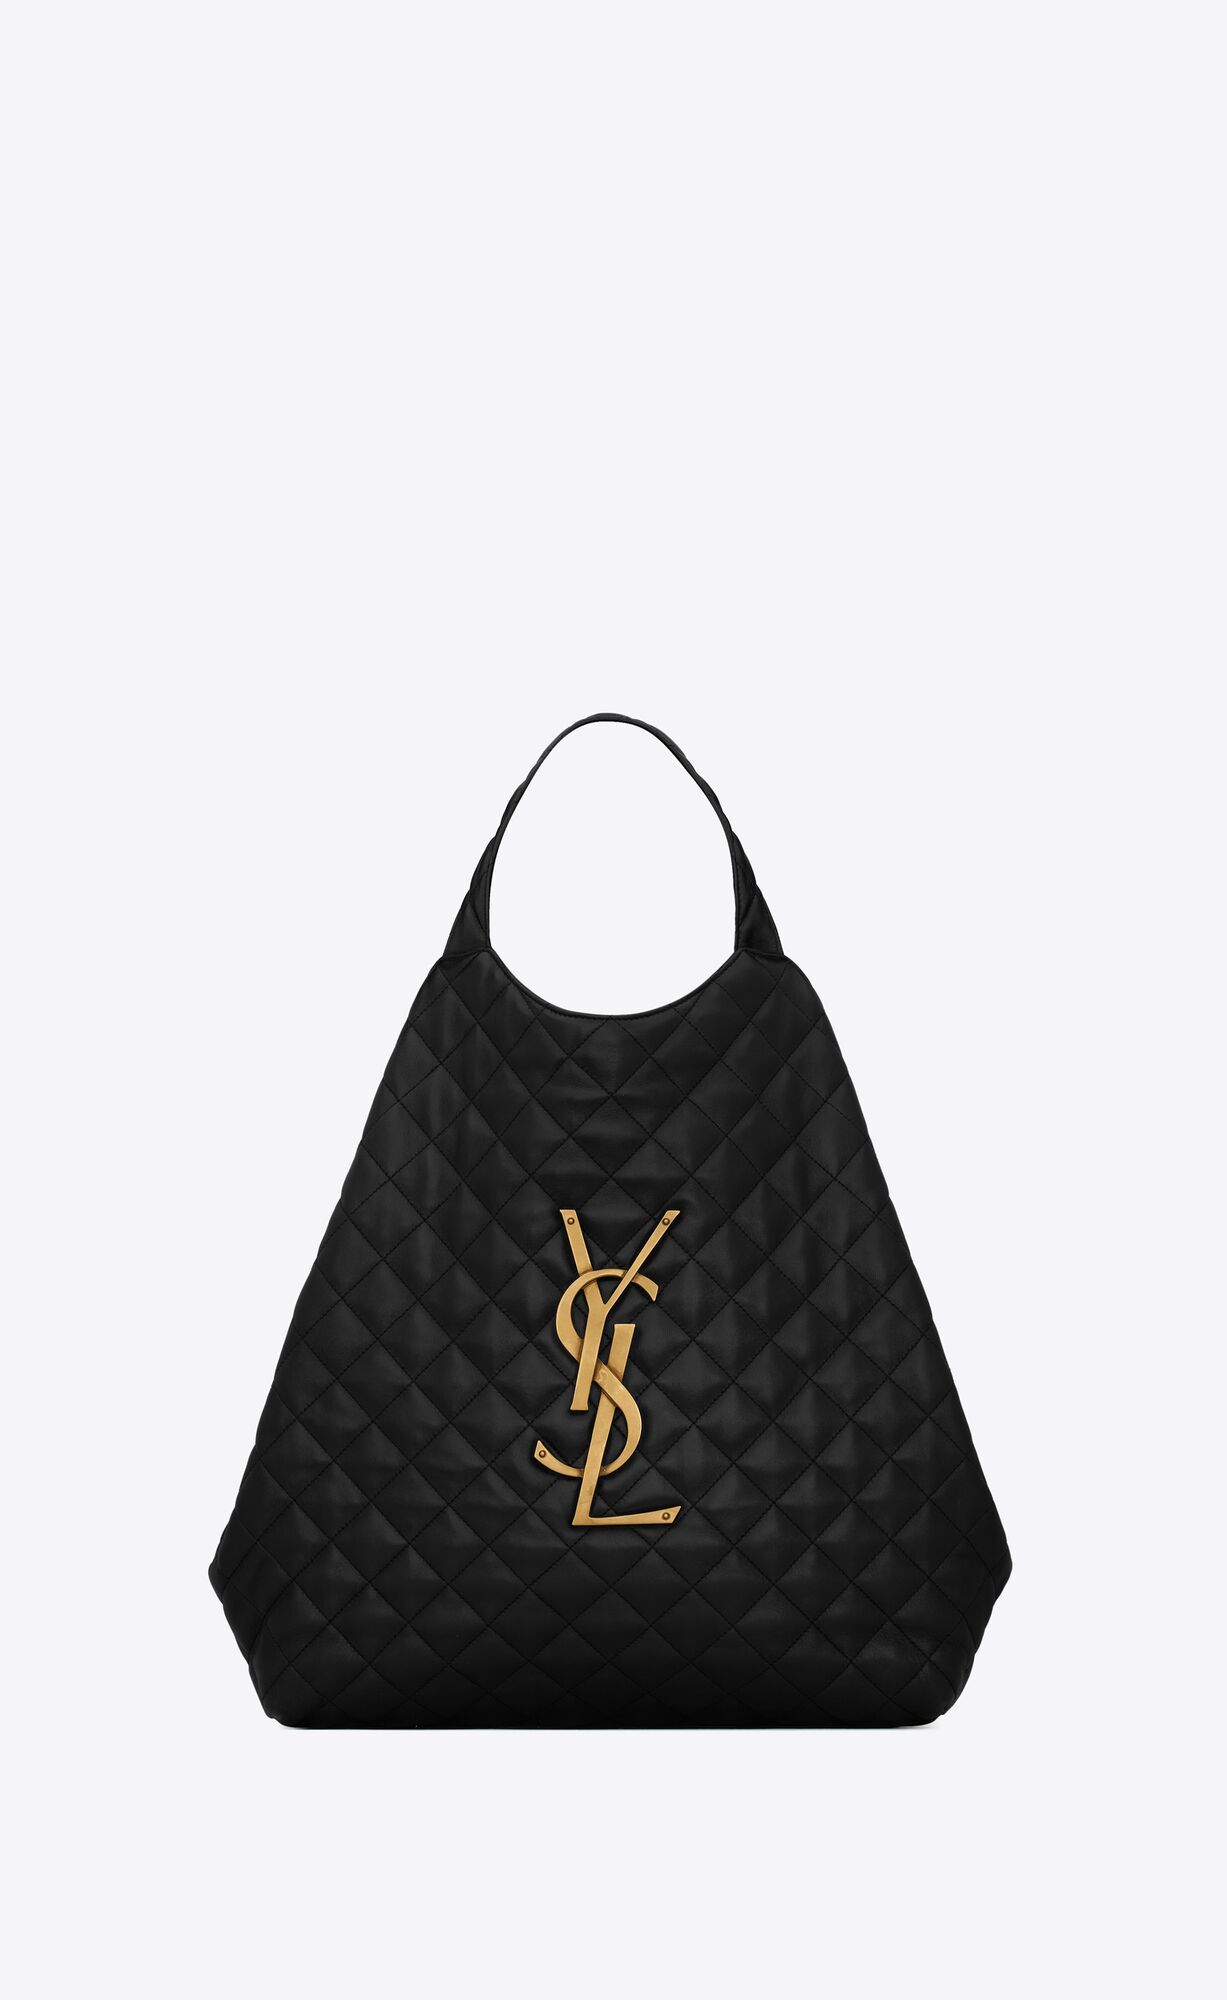 Heart Evangelista YSL Bag Most Popular YSL Bag 2022  Image Consultant  Training  Personal Stylist Courses  Sterling Style Academy  New York   Dubai  Paris  Singapore